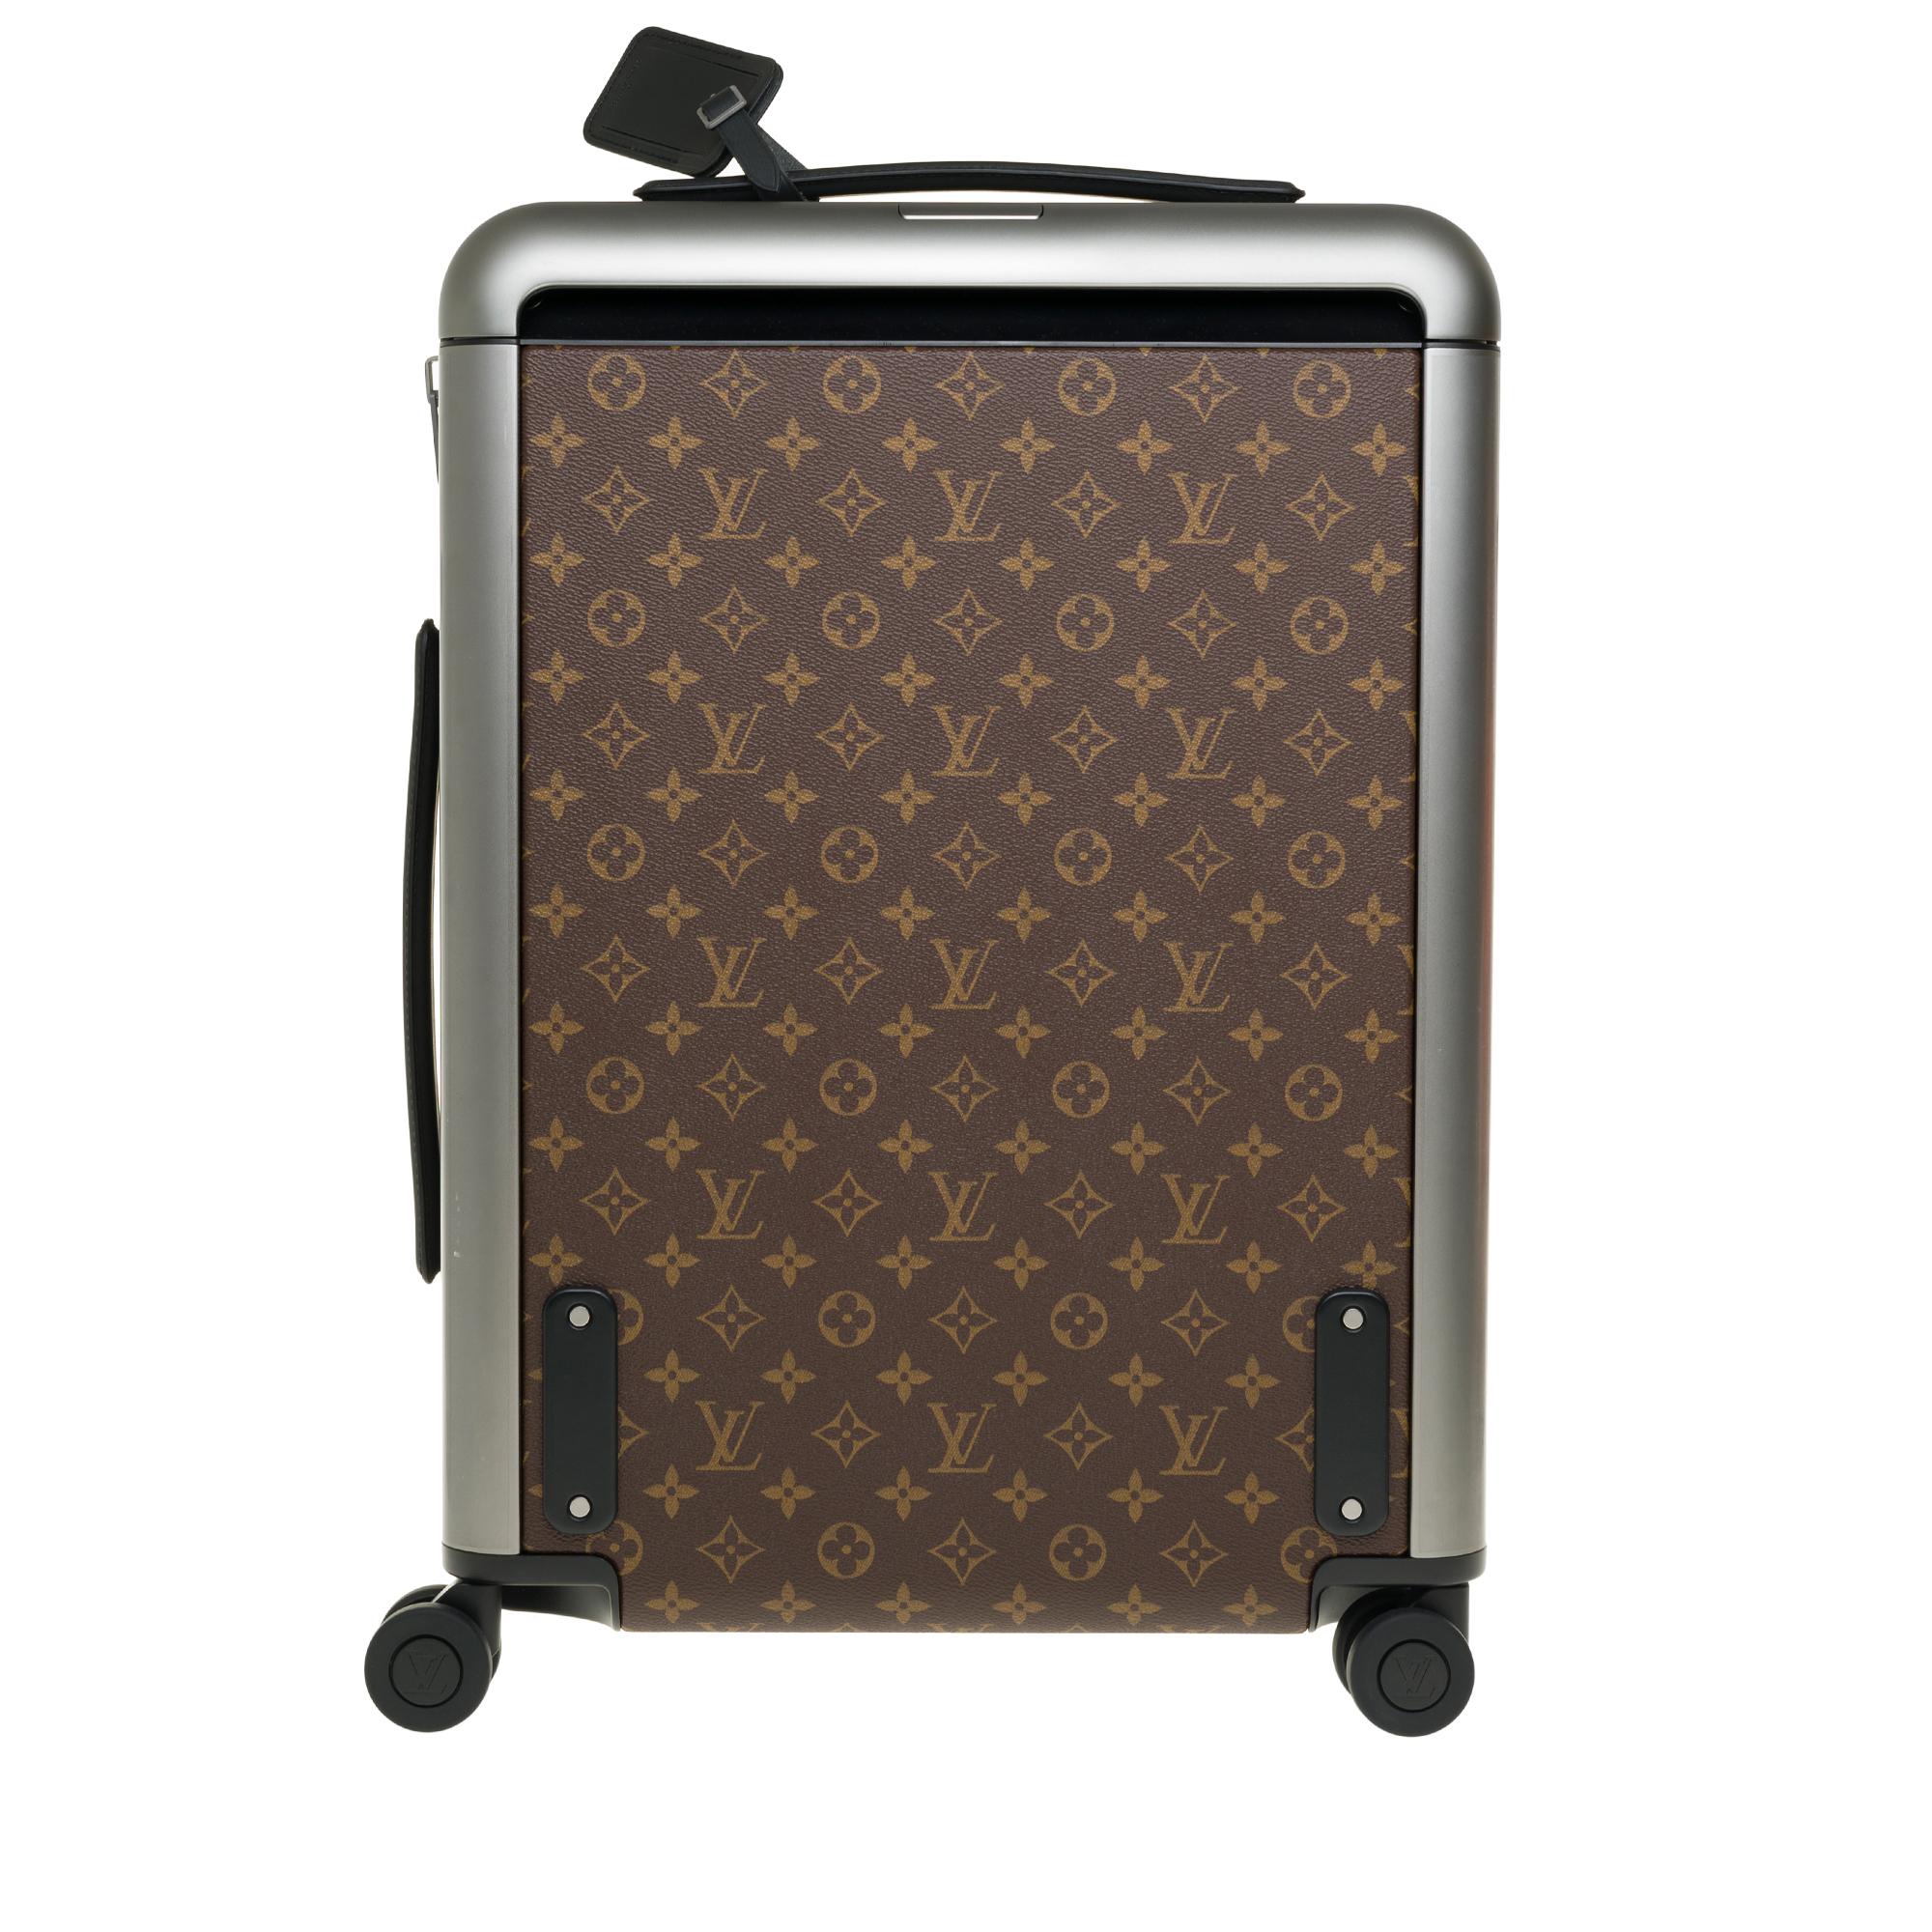 LIMITED EDITION - SOLD OUT -MEN FASHION SHOW SPRING/SUMMER 2021


Crafted in Monogram canvas, this Horizon 55 wheeled luggage is enhanced by two embroidered inserts that present an LV mascot from Virgil Abloh’s animated film «Zoooom with friends».